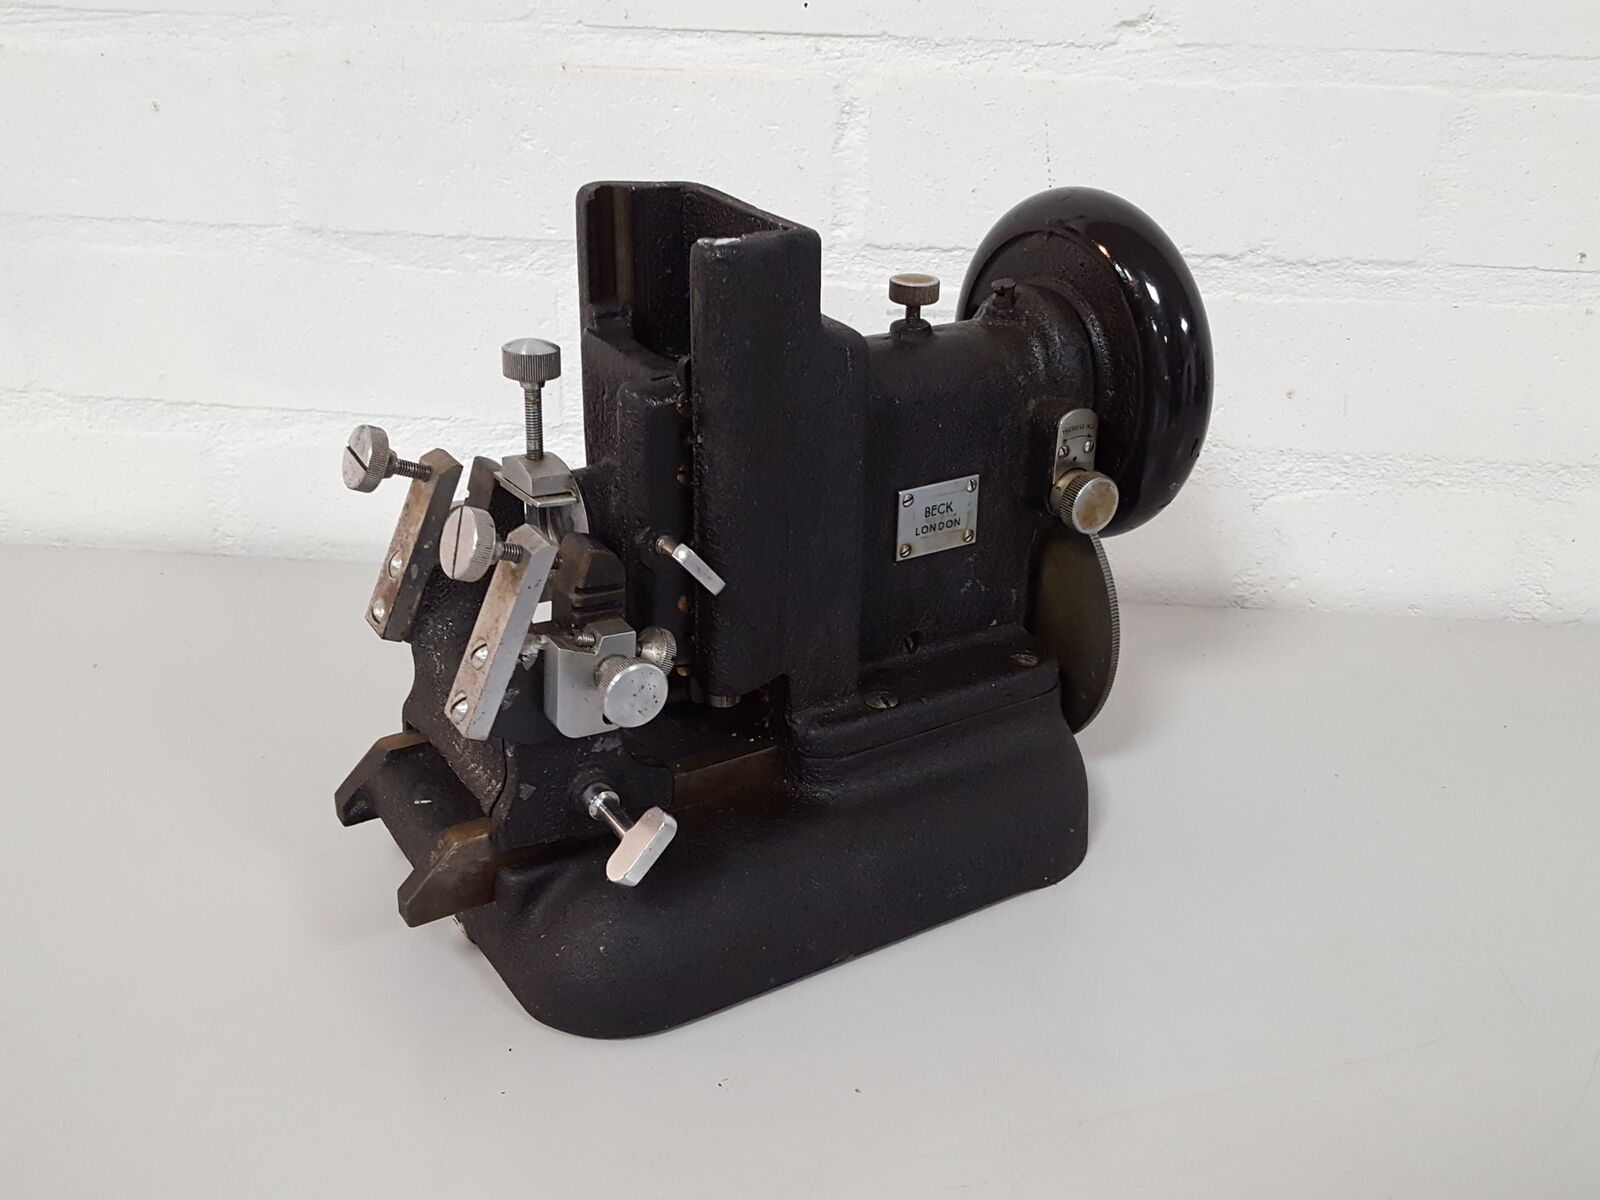 Beck London Vintage Rotary Microtome Lab Histology Tissue Processing